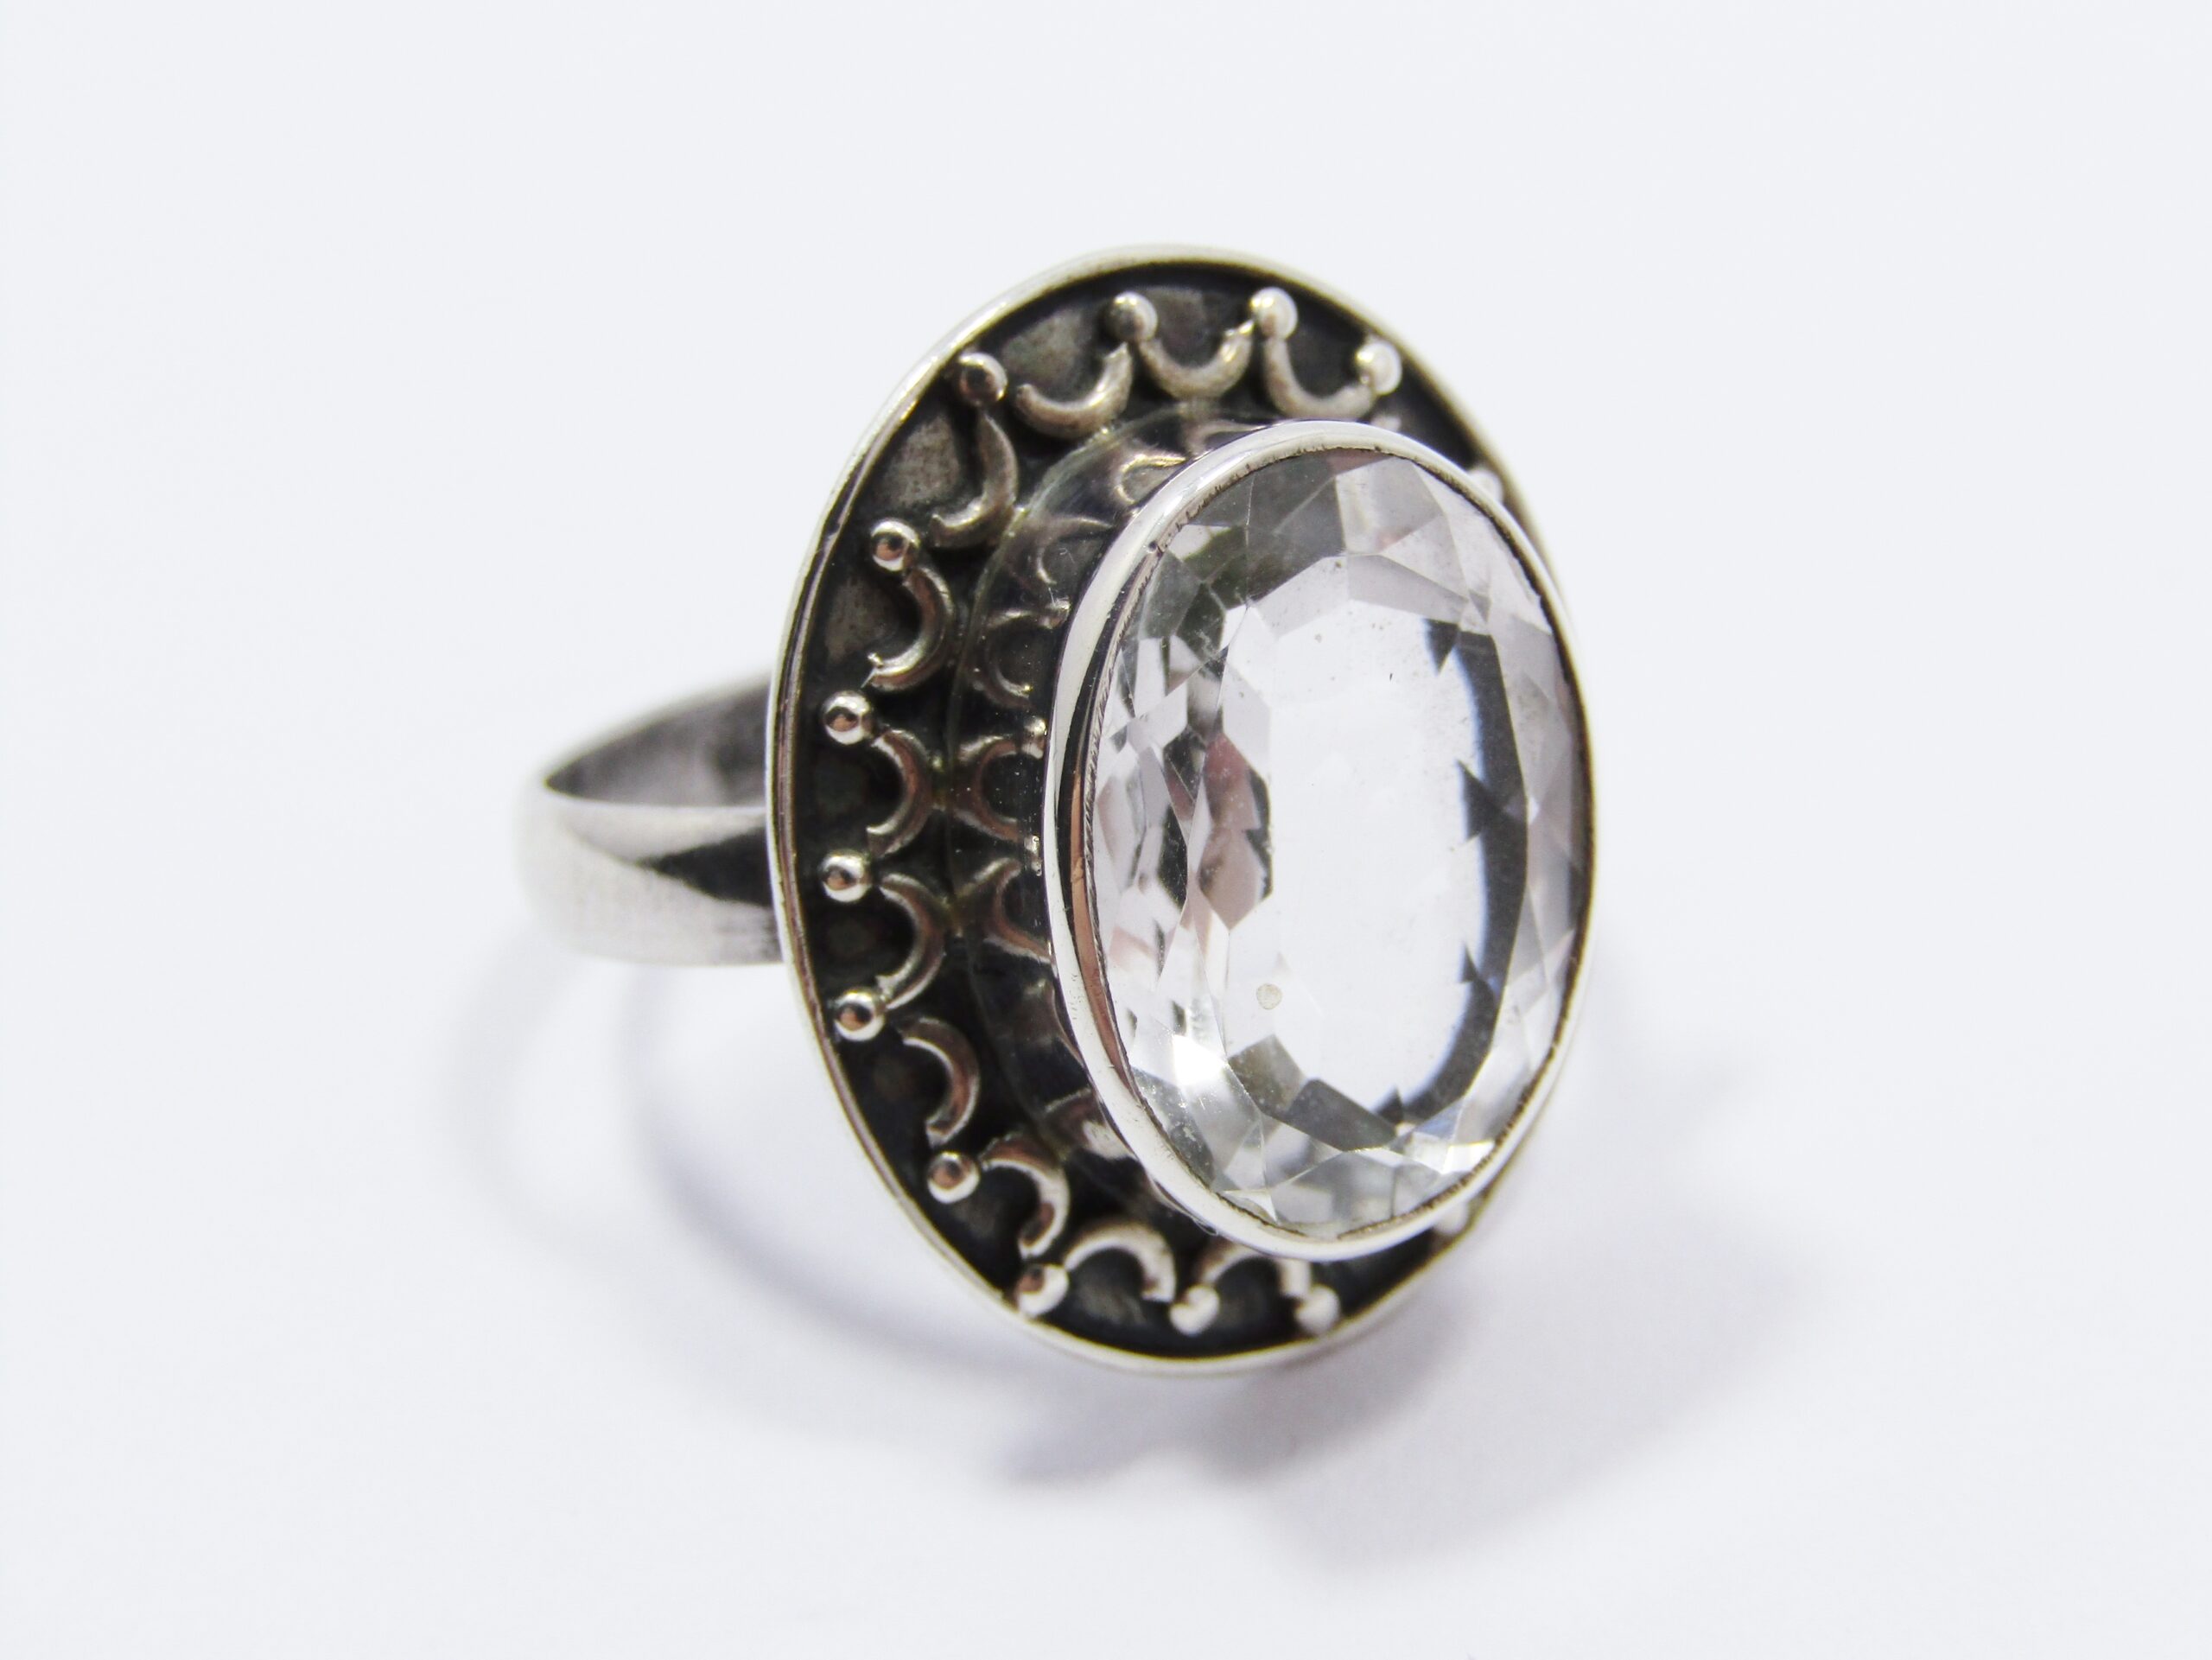 A Lovely Clear Quartz Bohemian Style Ring in Sterling Silver.